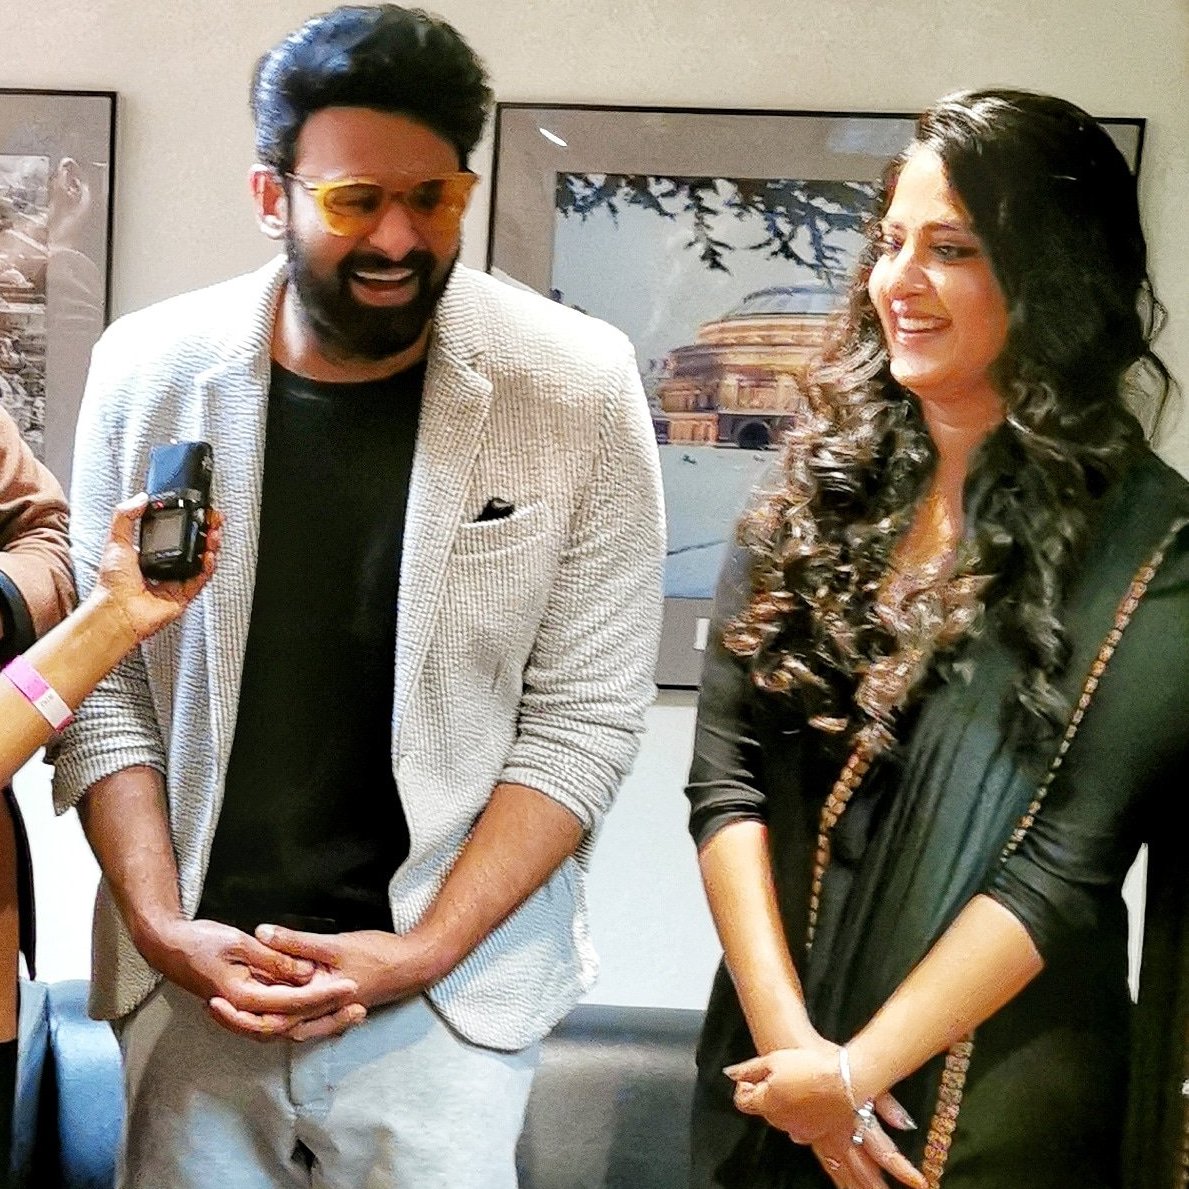 #Prabhas and #AnushkaShetty are shooting for their respective films at Ramoji City in Hyderabad🥰❤️

#TheRajaSaab #Ghaati